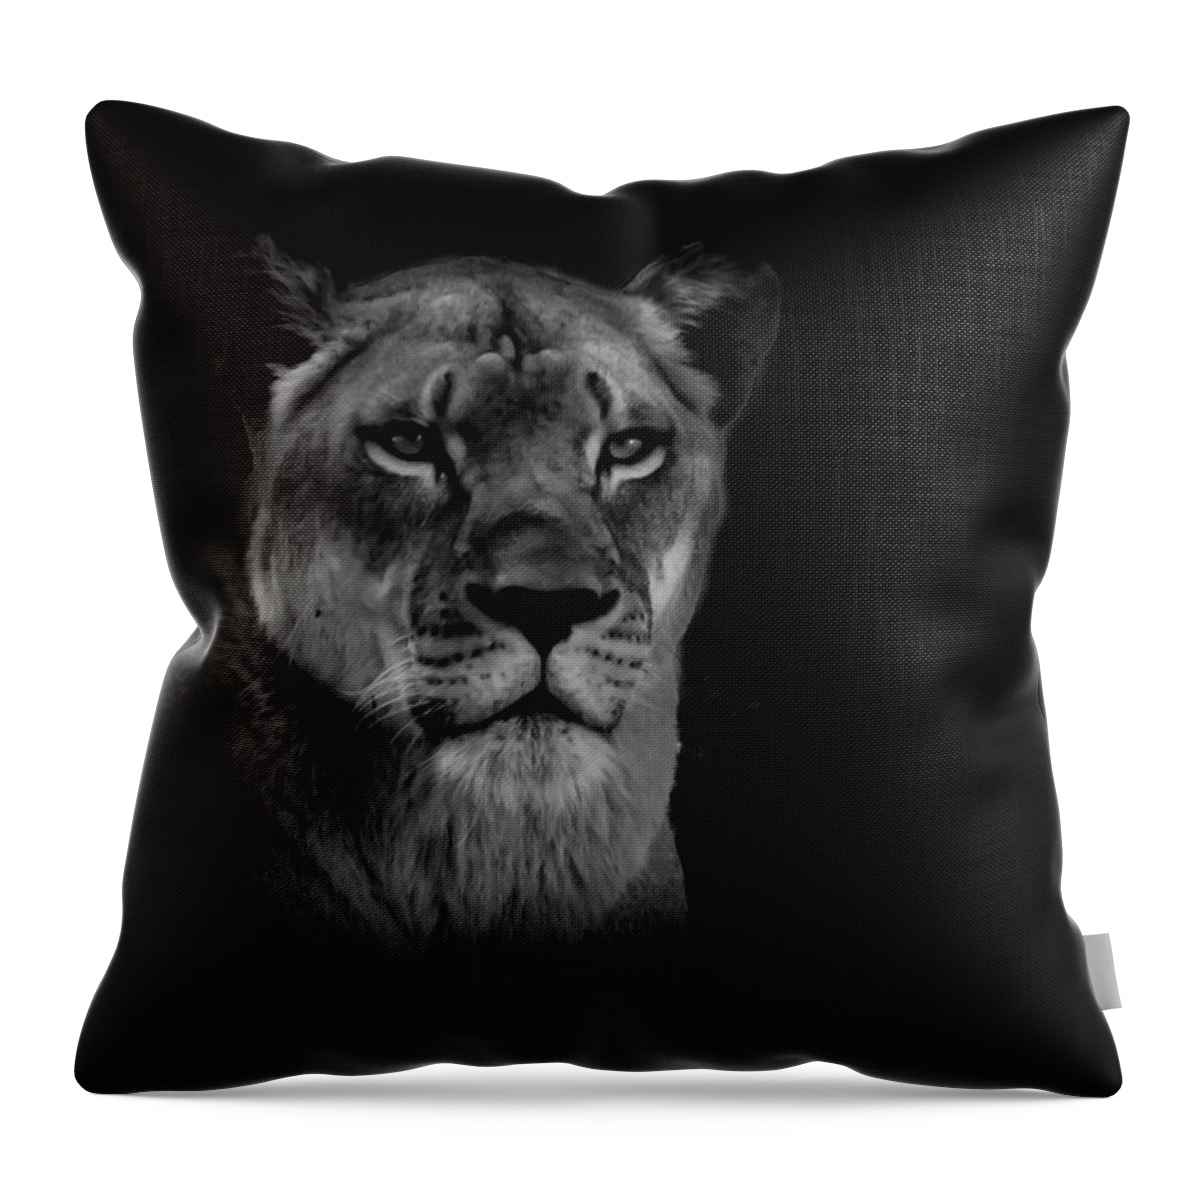 Lioness Throw Pillow featuring the photograph The Queen by Jaime Mercado